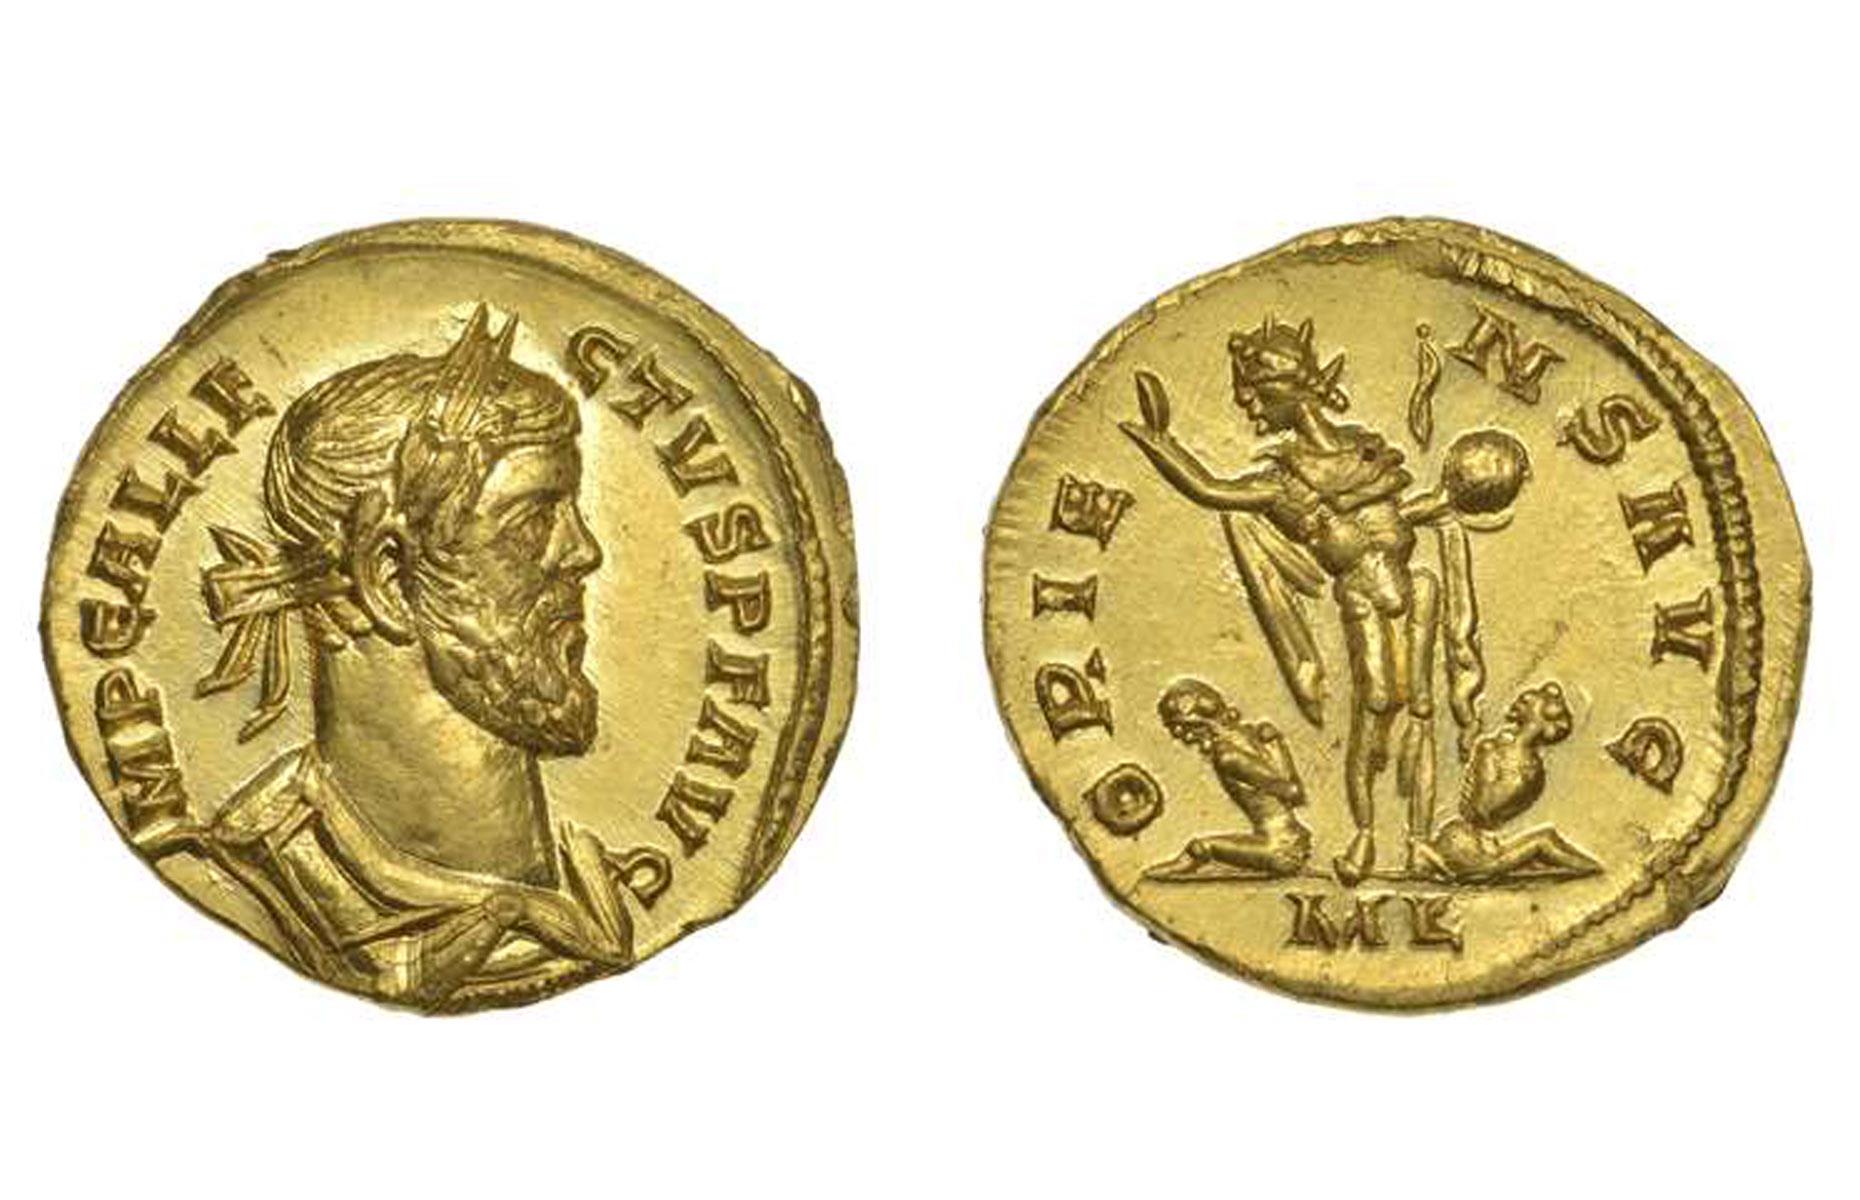 The Roman 'Brexiteer' gold coin